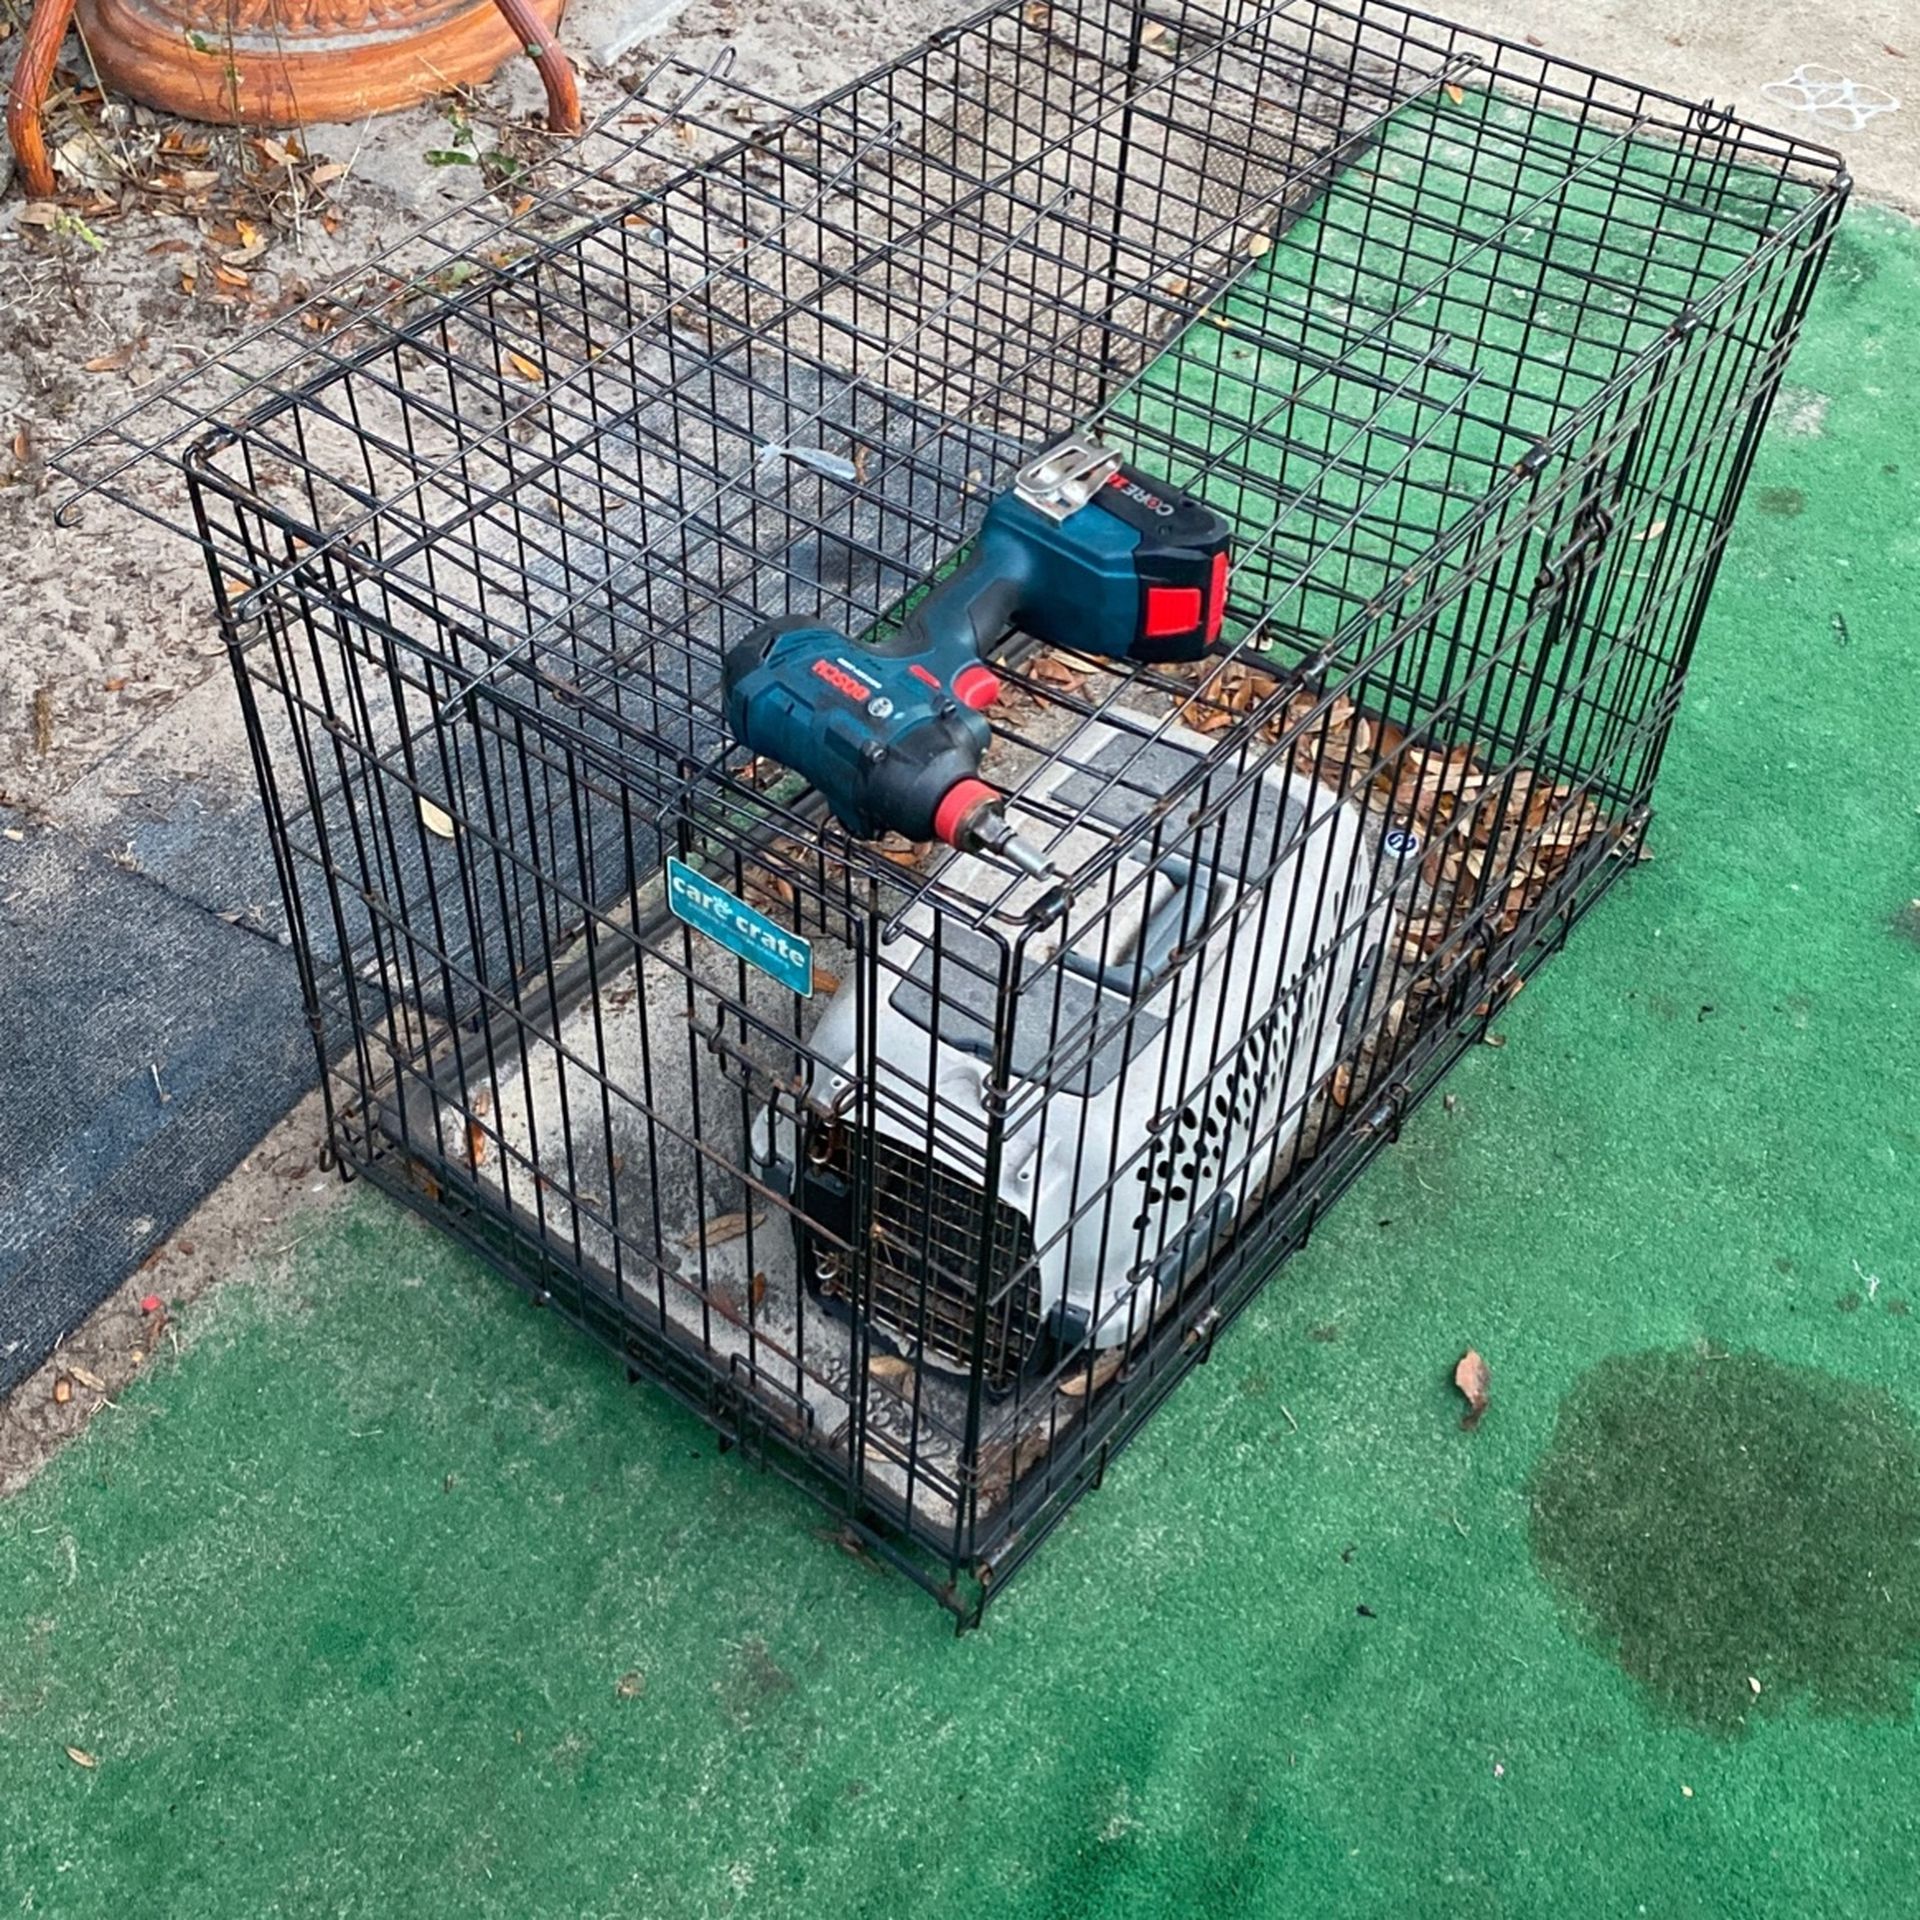 Large Cage And Small Dog/cat Carrier